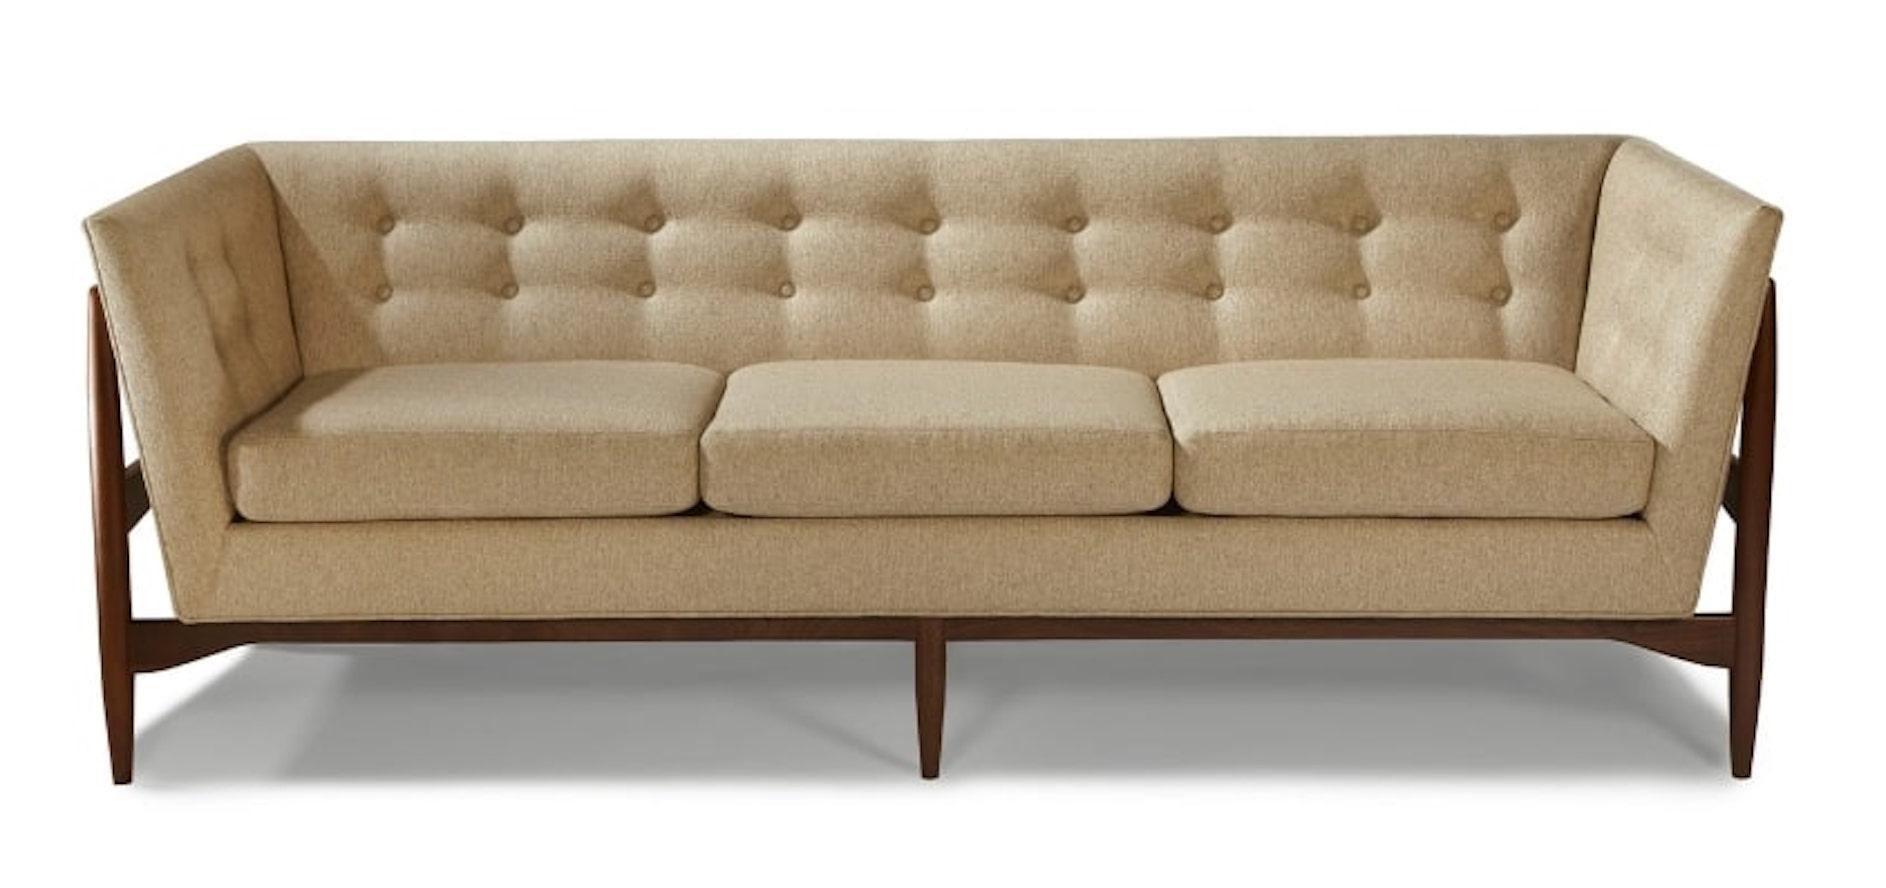 Button Up sofa features button tufting and a solid walnut wood base that is exposed for dramatic flair. Designed by Milo Baughman in 1959, this sofa holds its modern style in today's home.
This is a custom order item, and not in stock.
Please